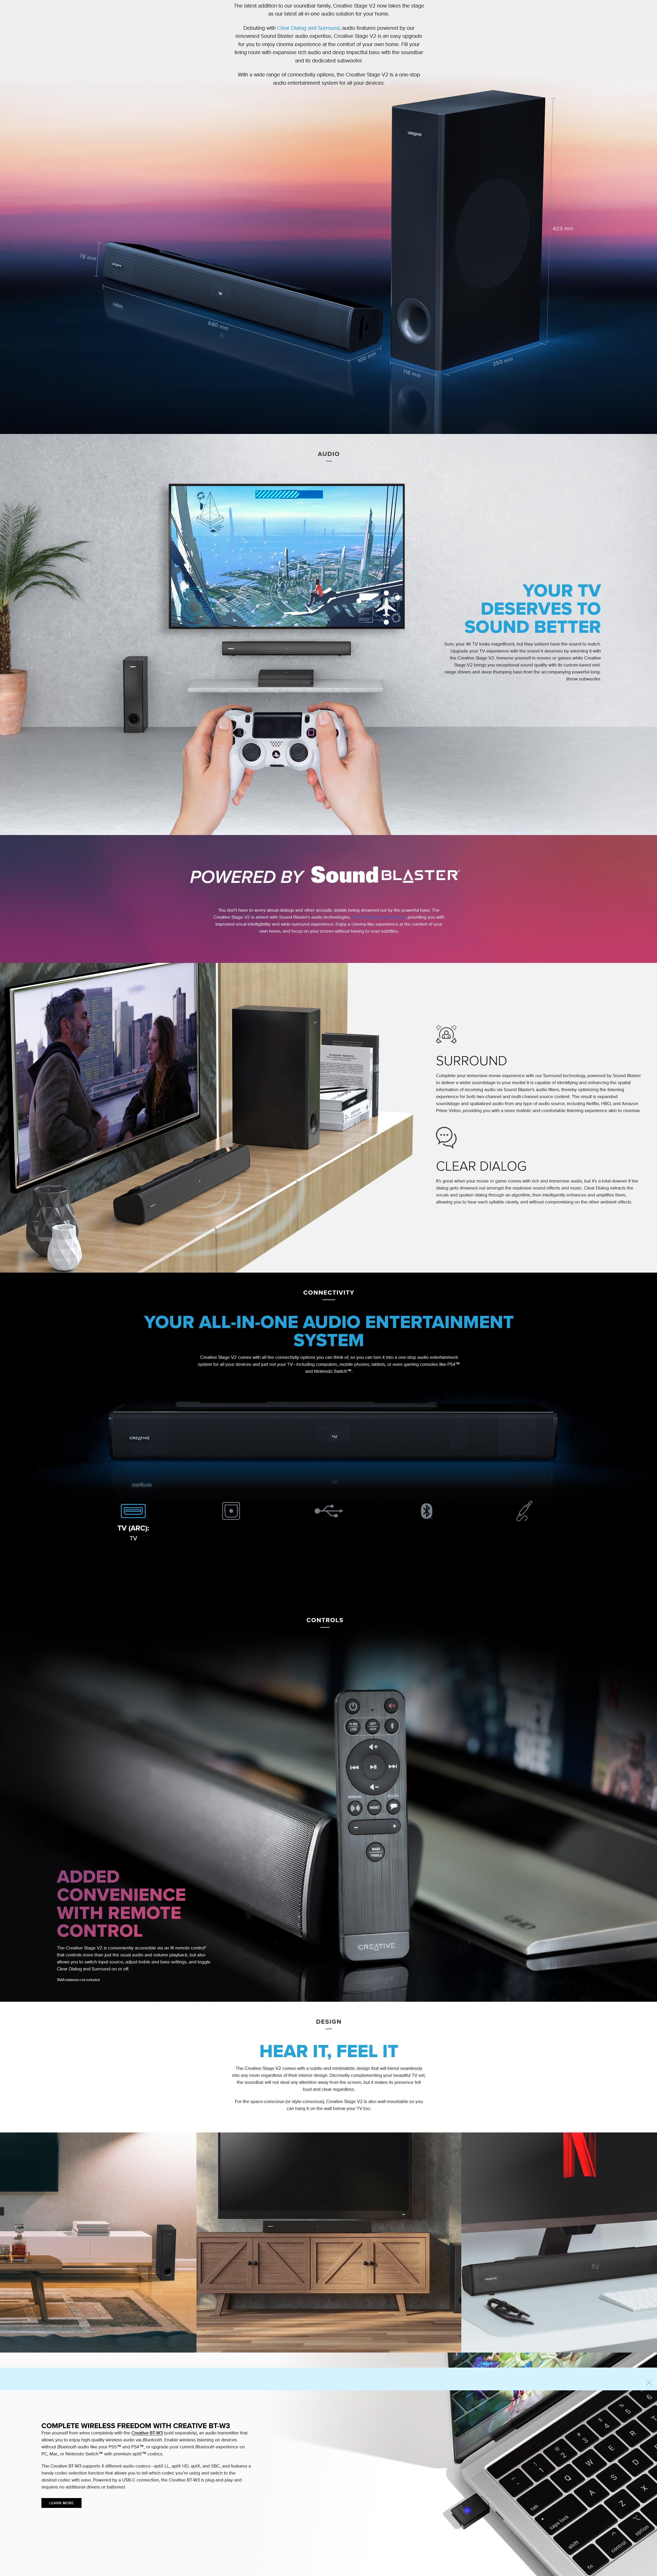 A large marketing image providing additional information about the product Creative Stage V2 Speaker 2.1 Soundbar with Subwoofer Black - Additional alt info not provided